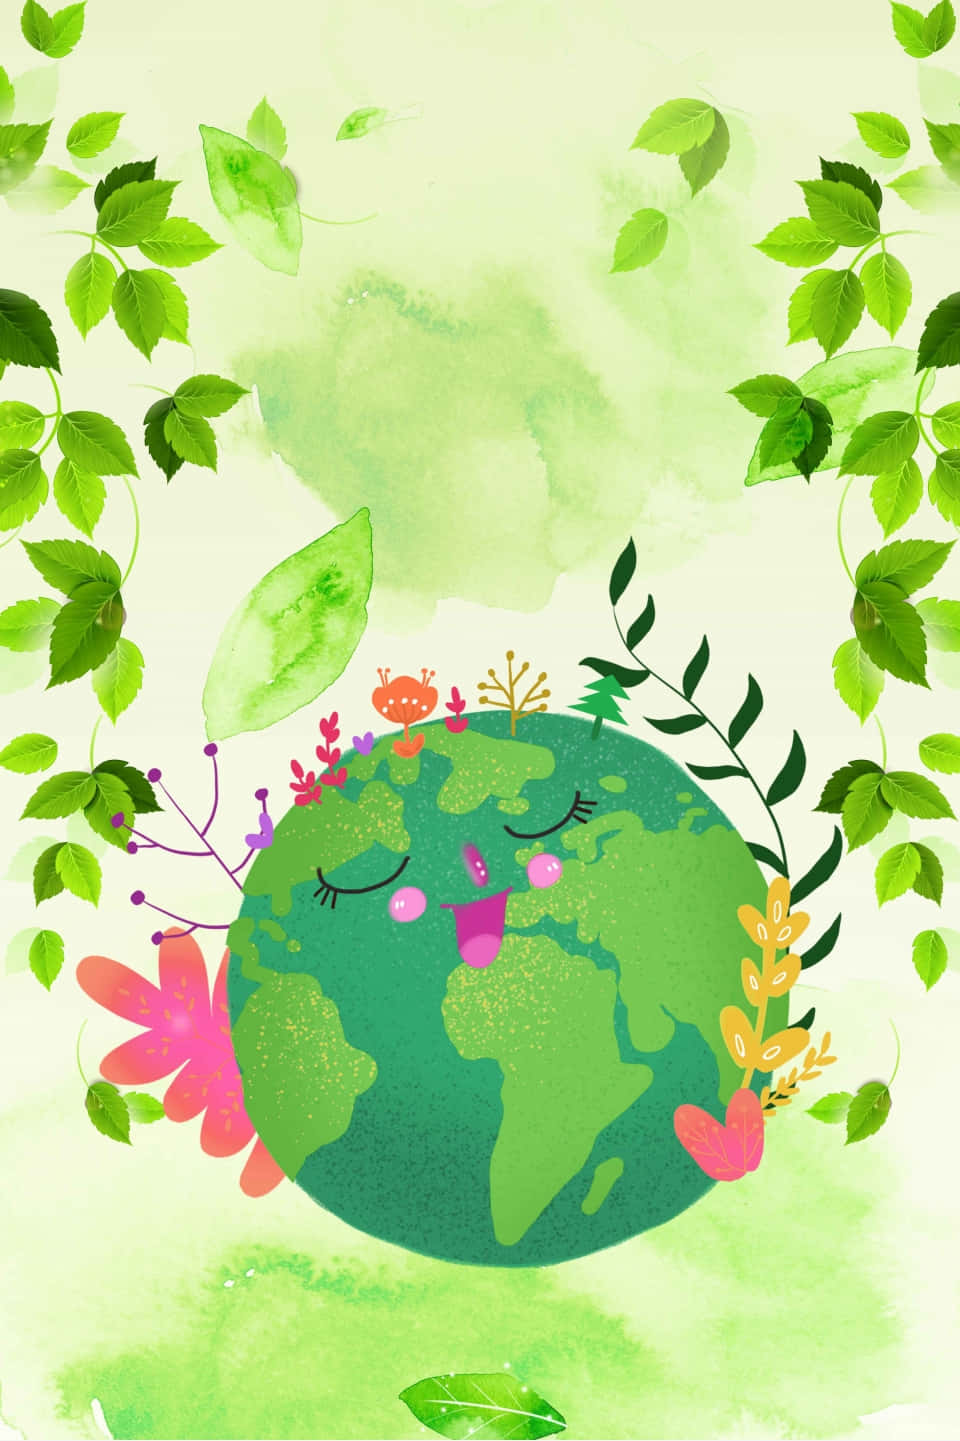 Earth Day Poster - Earth Day Poster